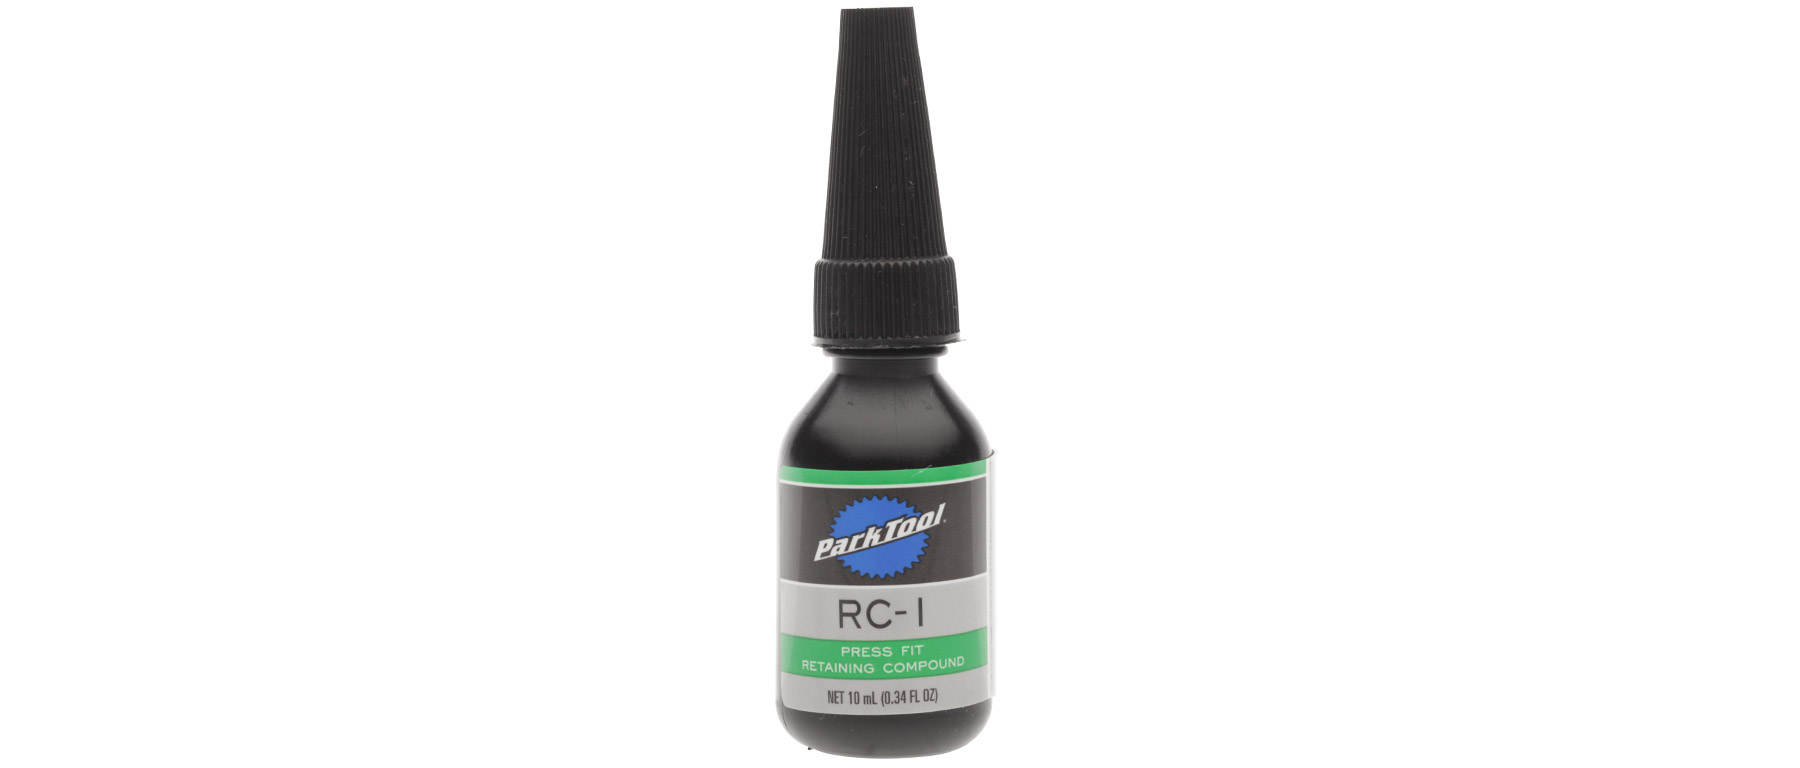 Park Tool RC-1 Green Press Fit Retaining Compound 10ml